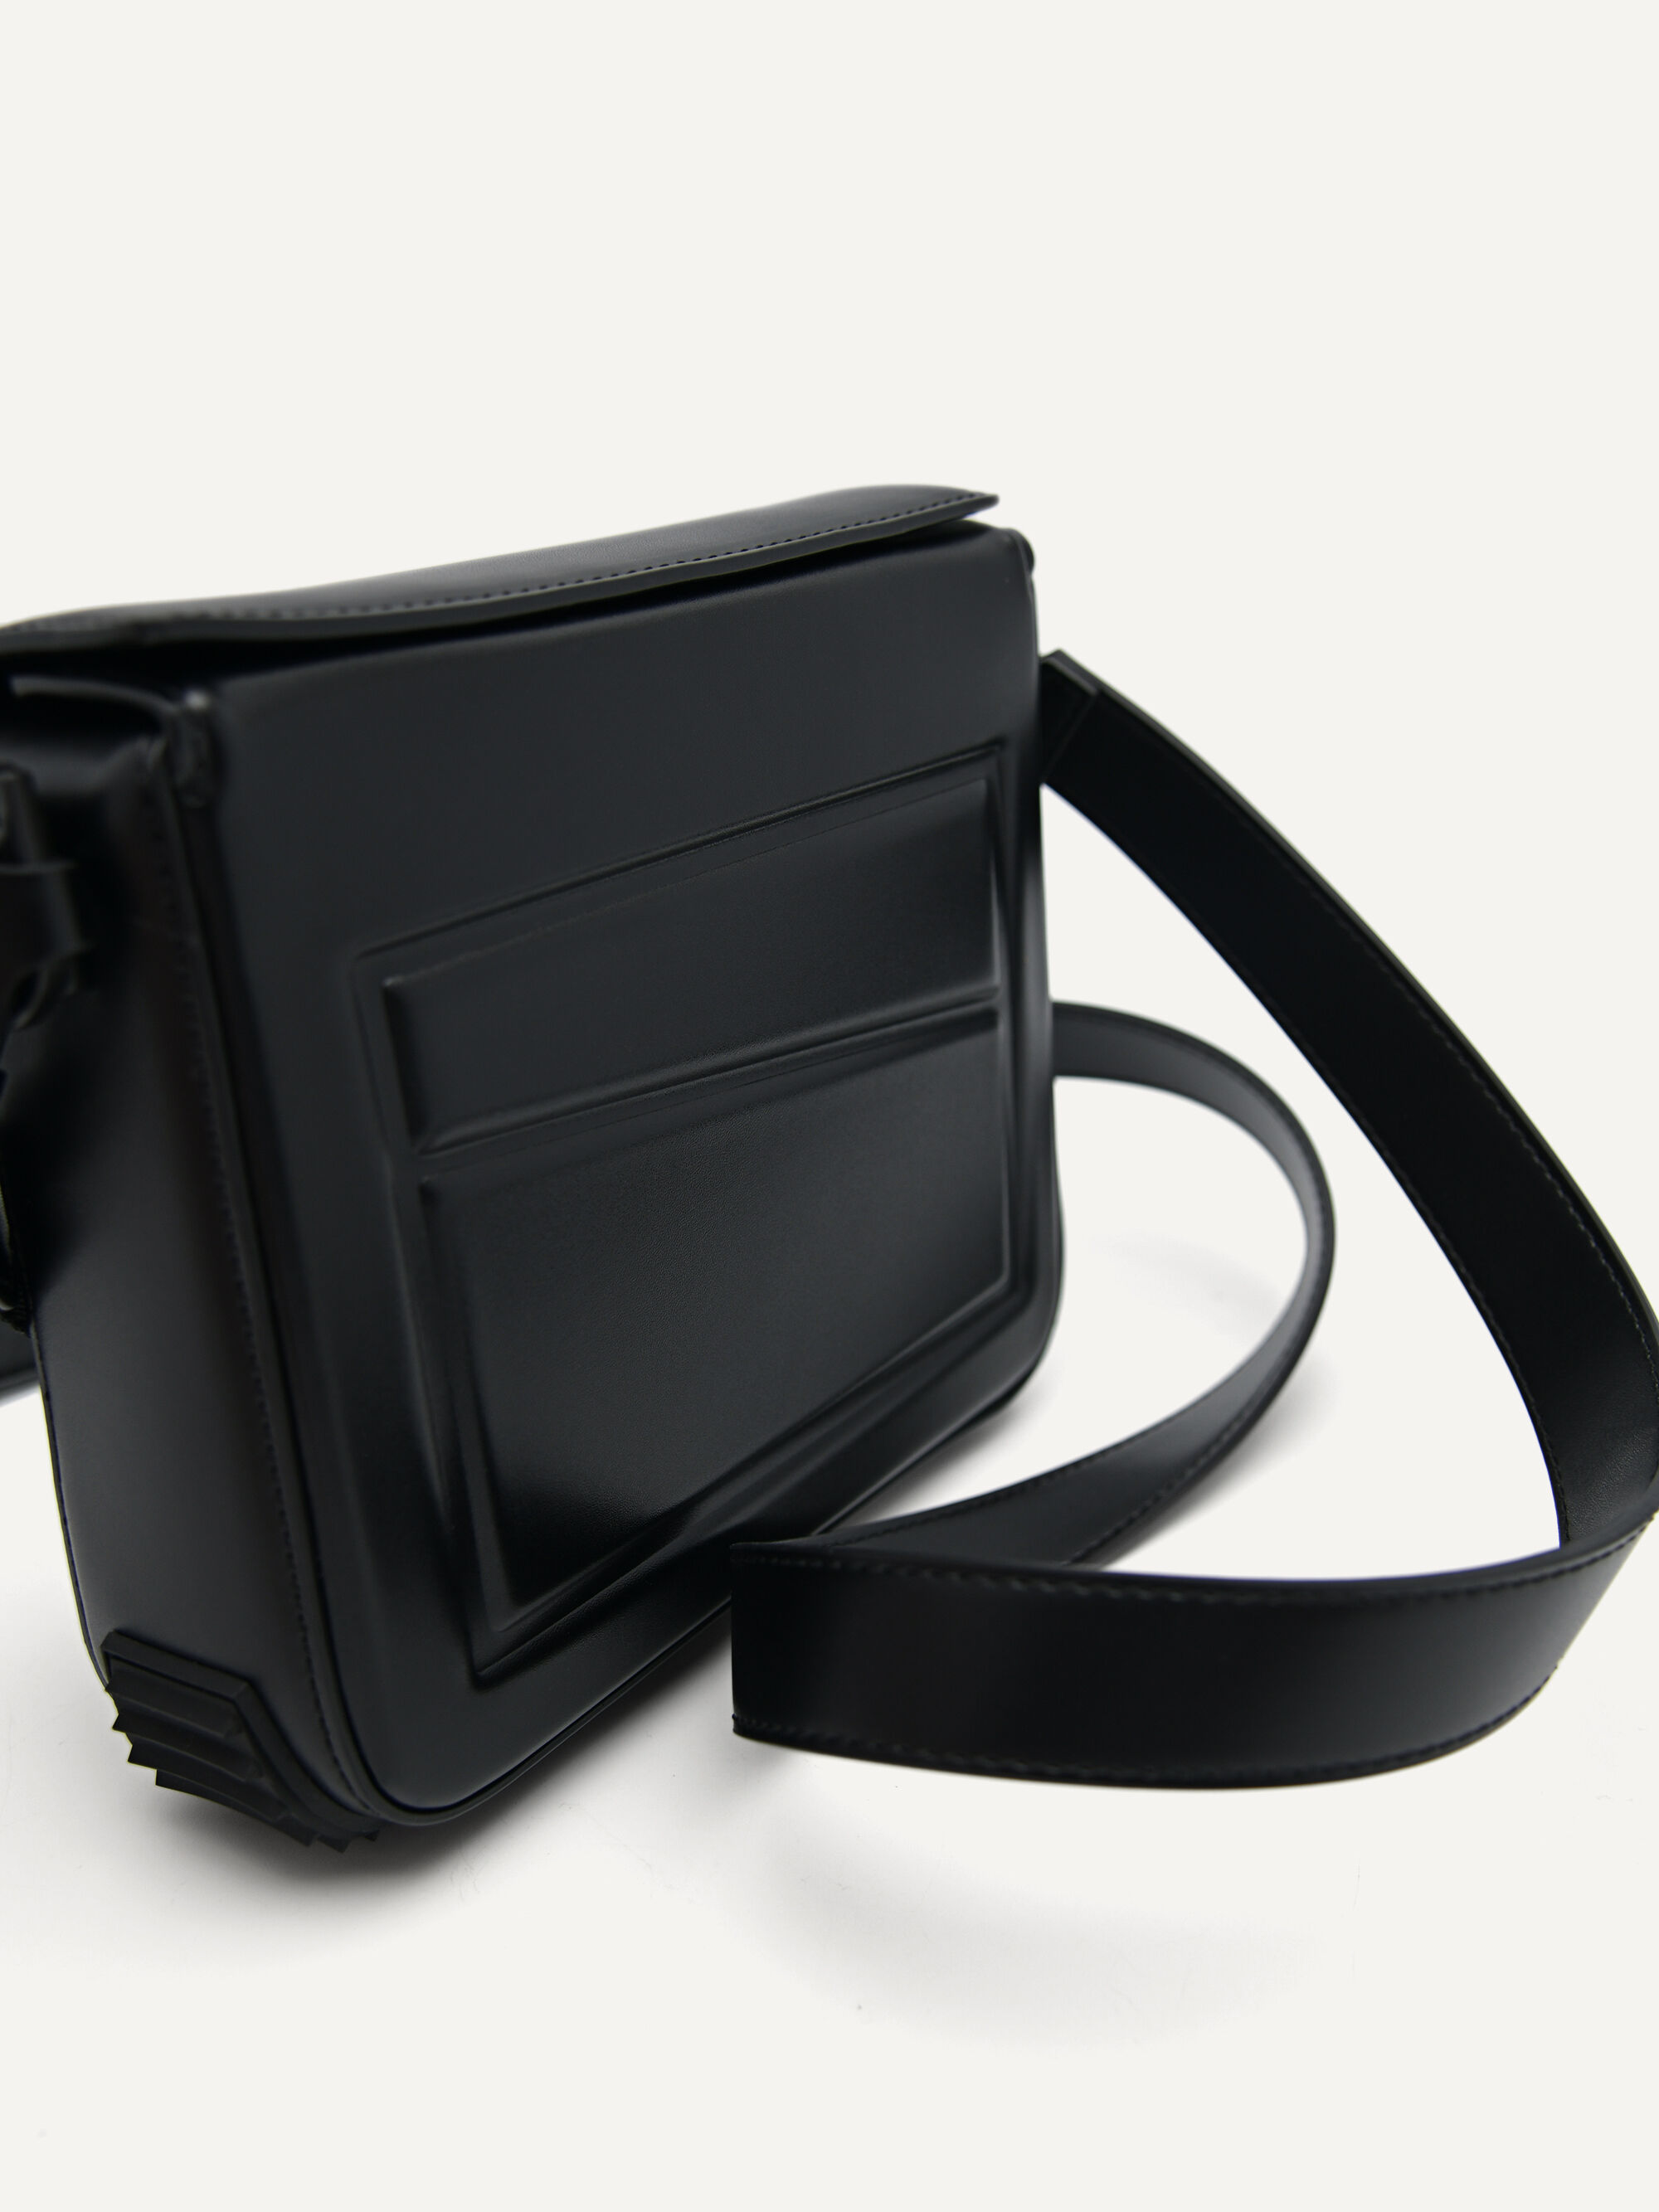 Small Square Bag Black Chain Strap For Party